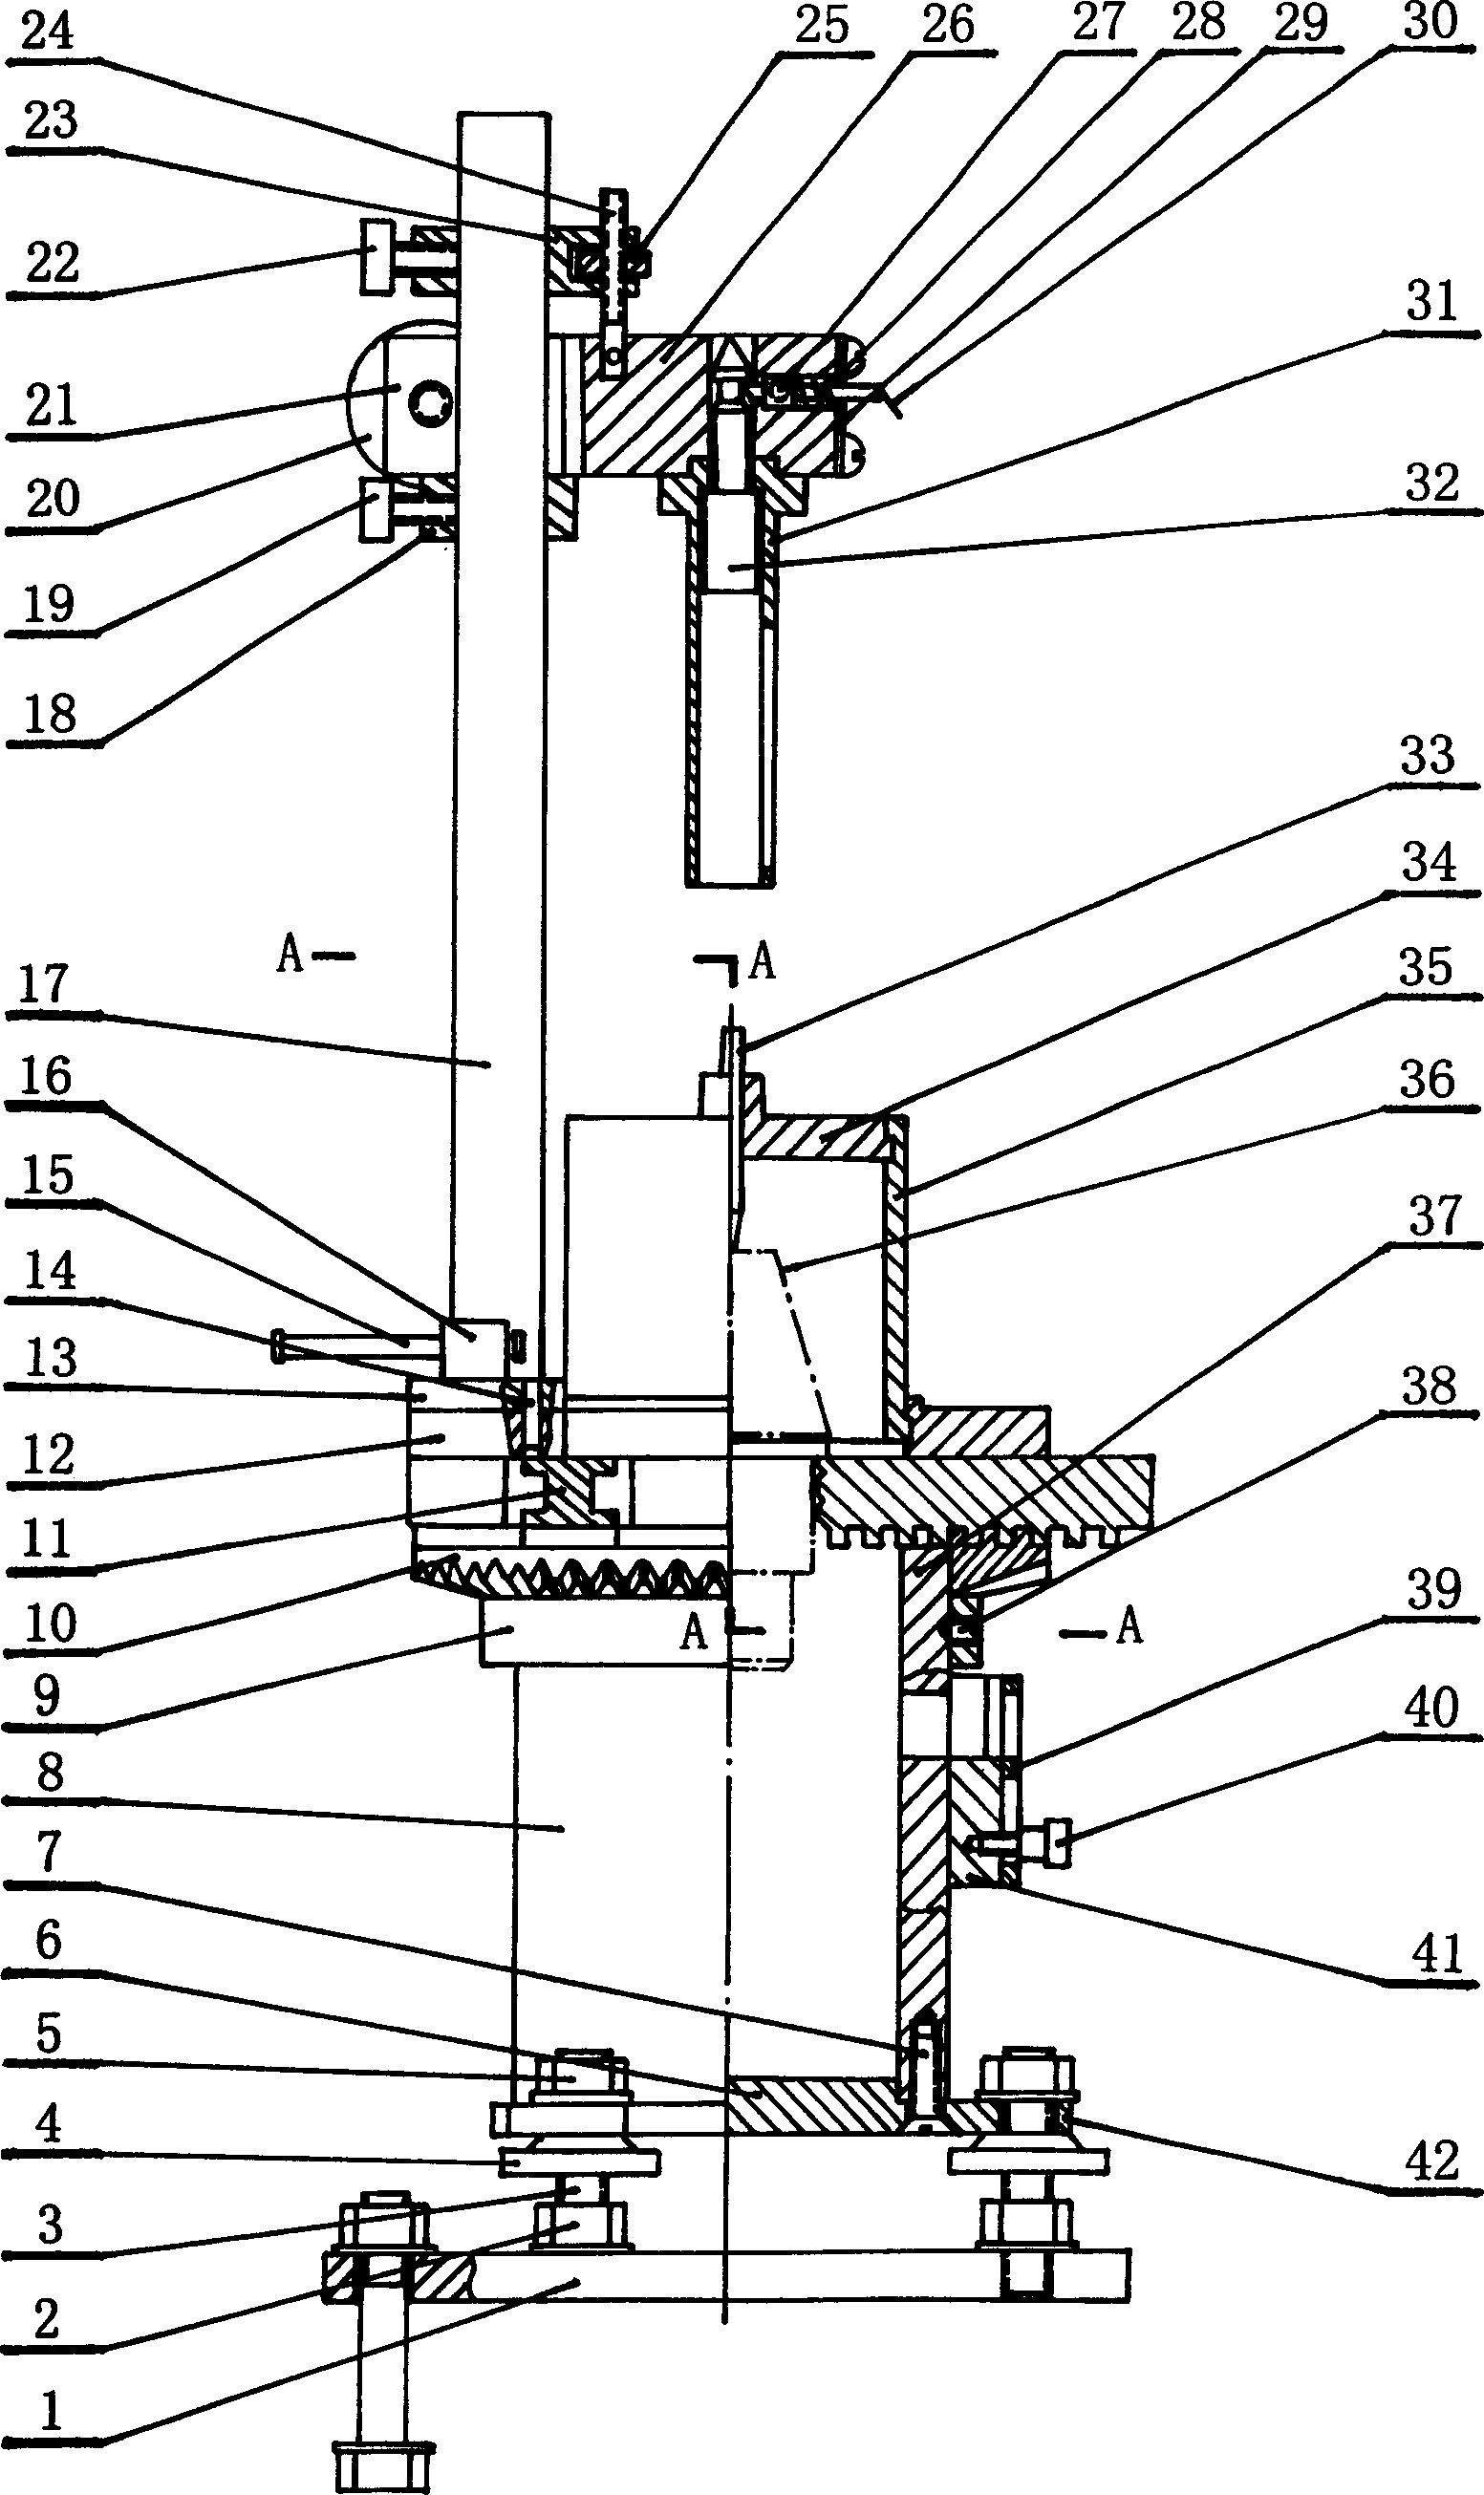 Detector for light fuse sensitivity and igniting property